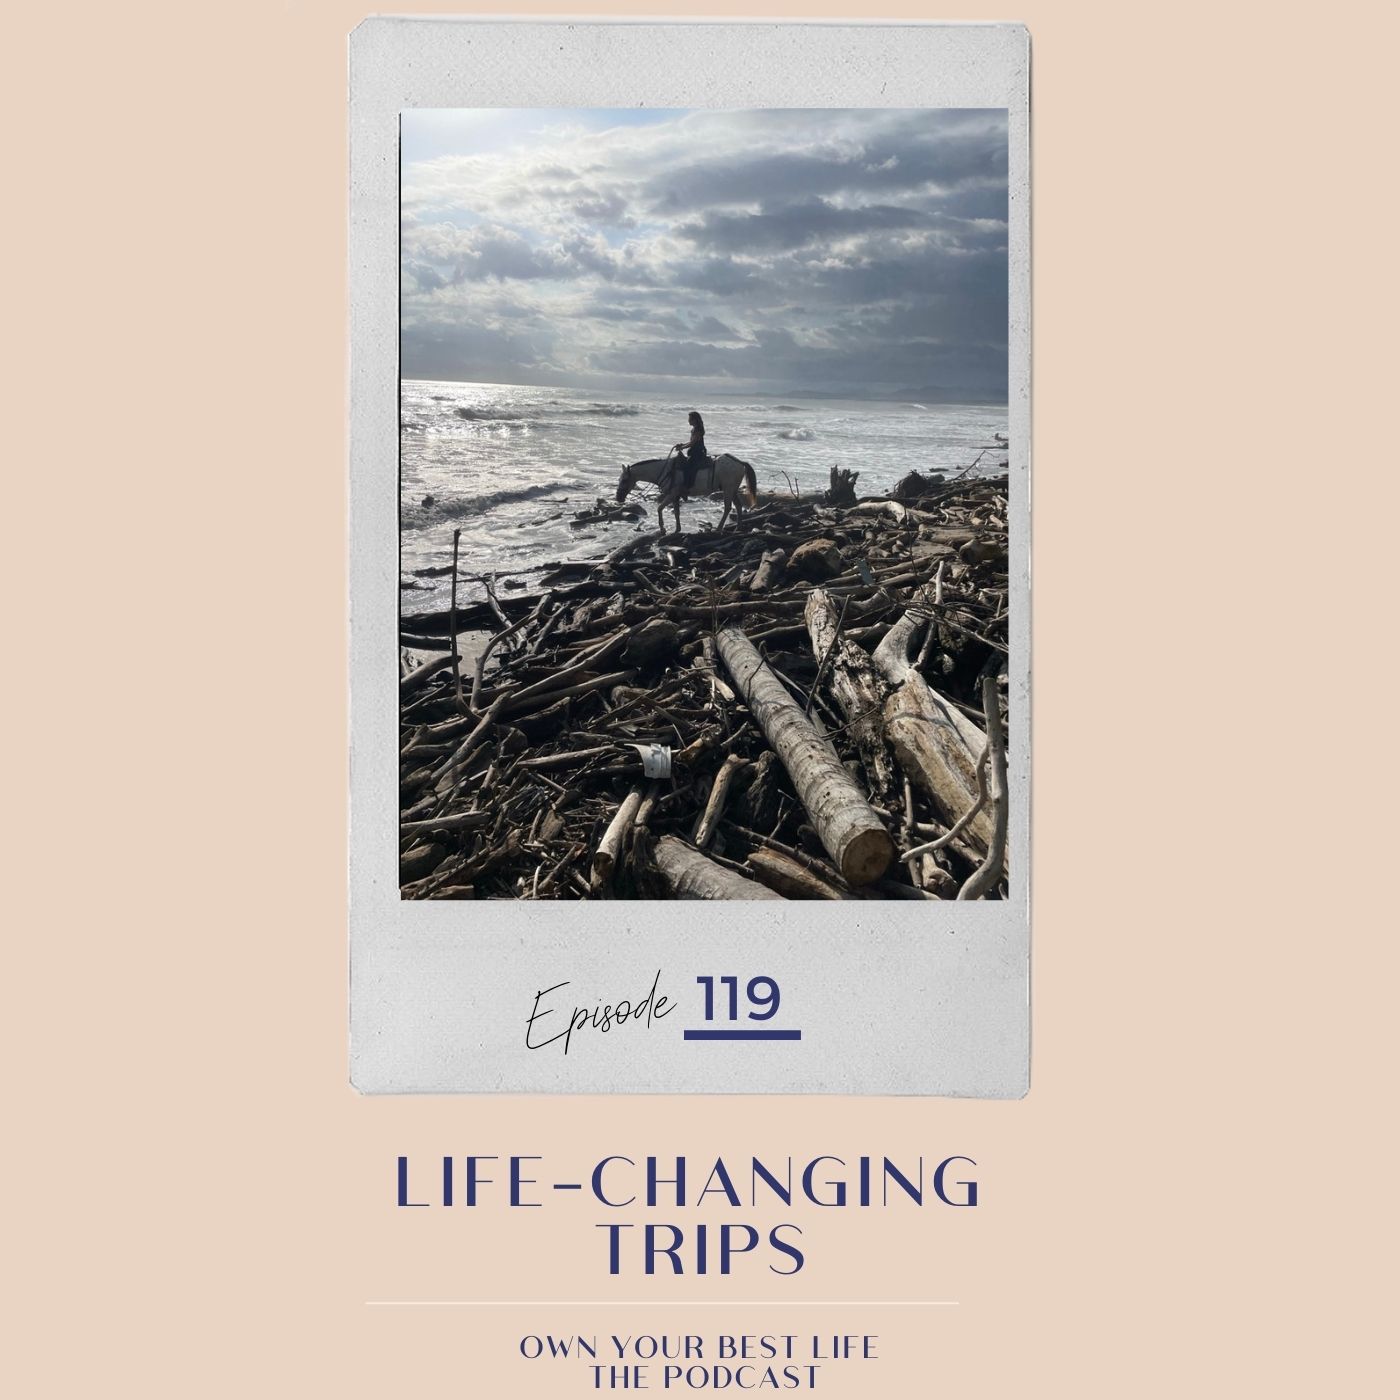 Life-changing trips